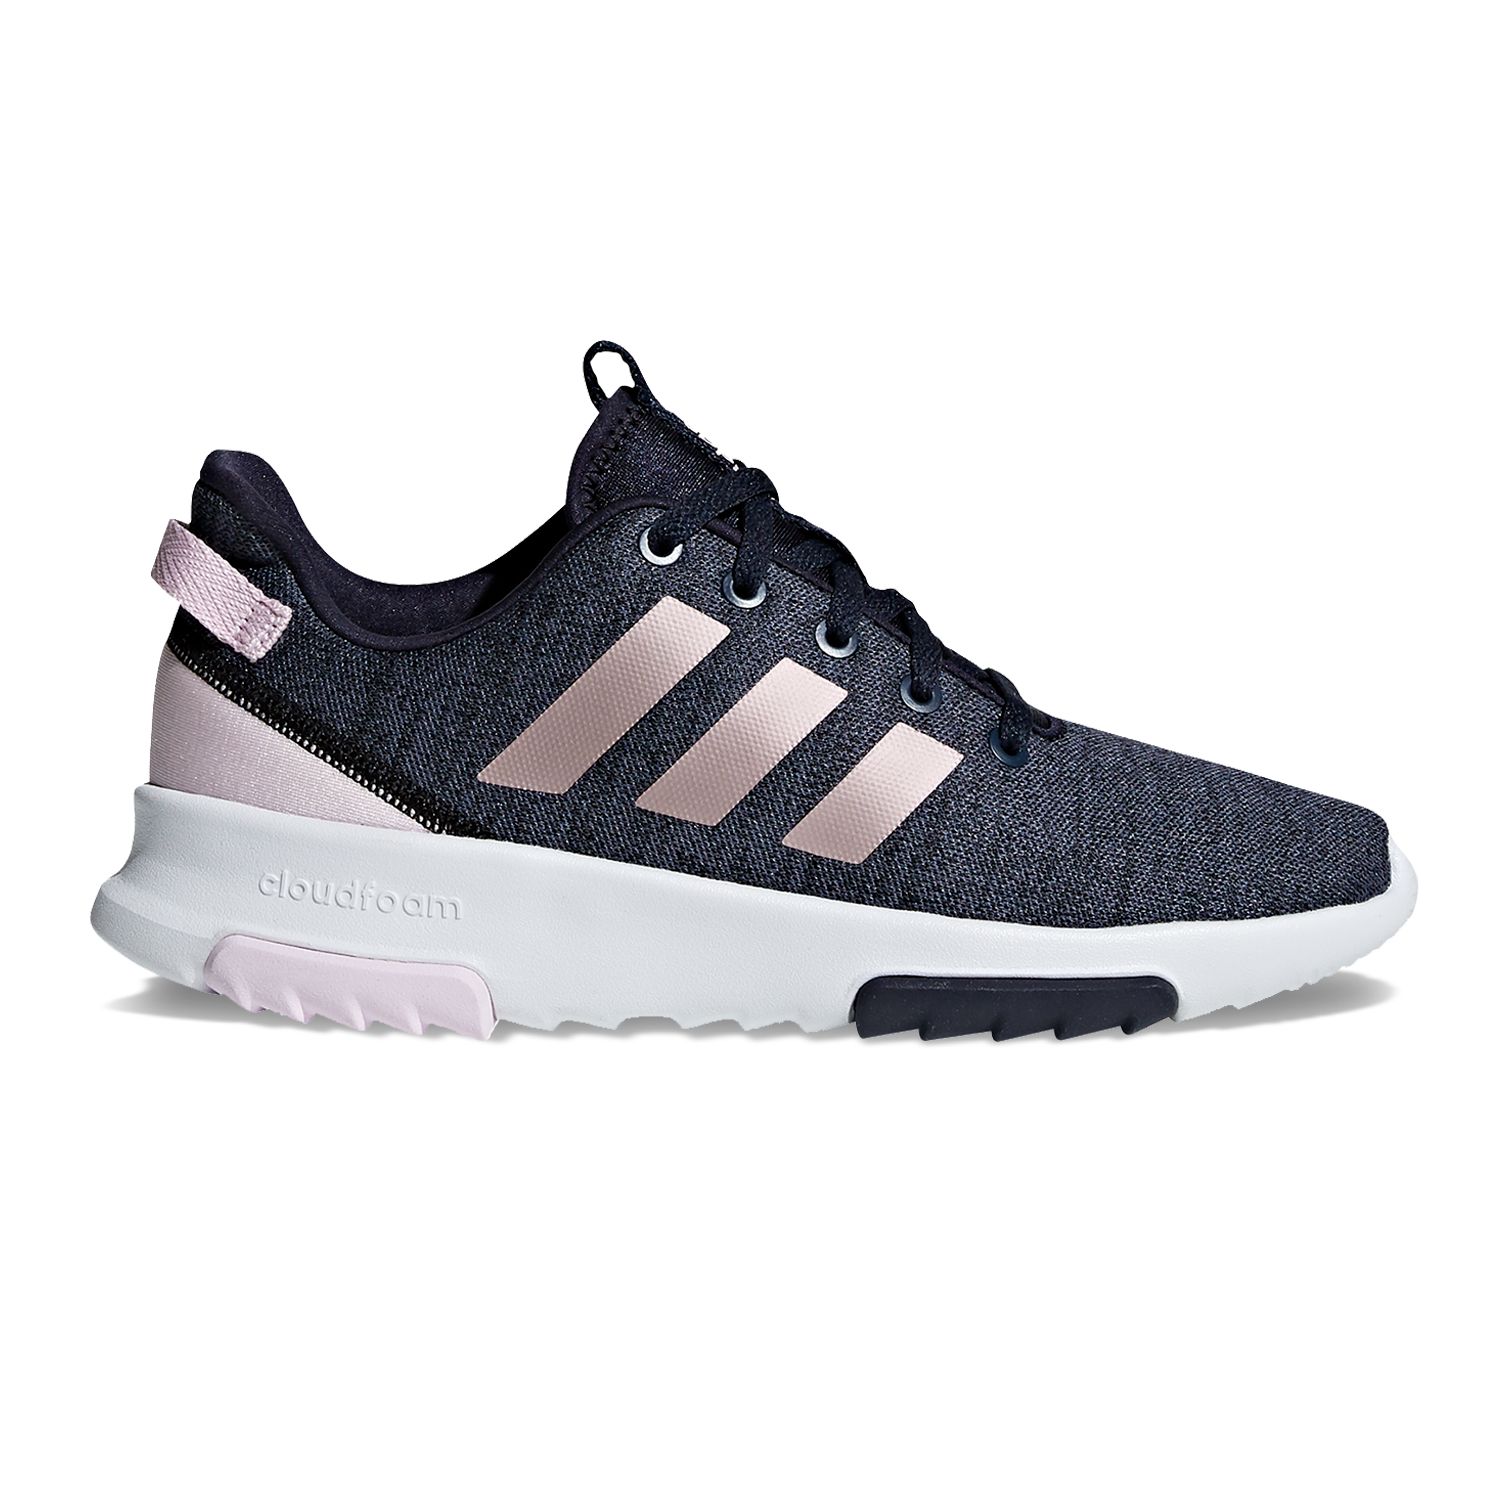 adidas cloudfoam youth shoes